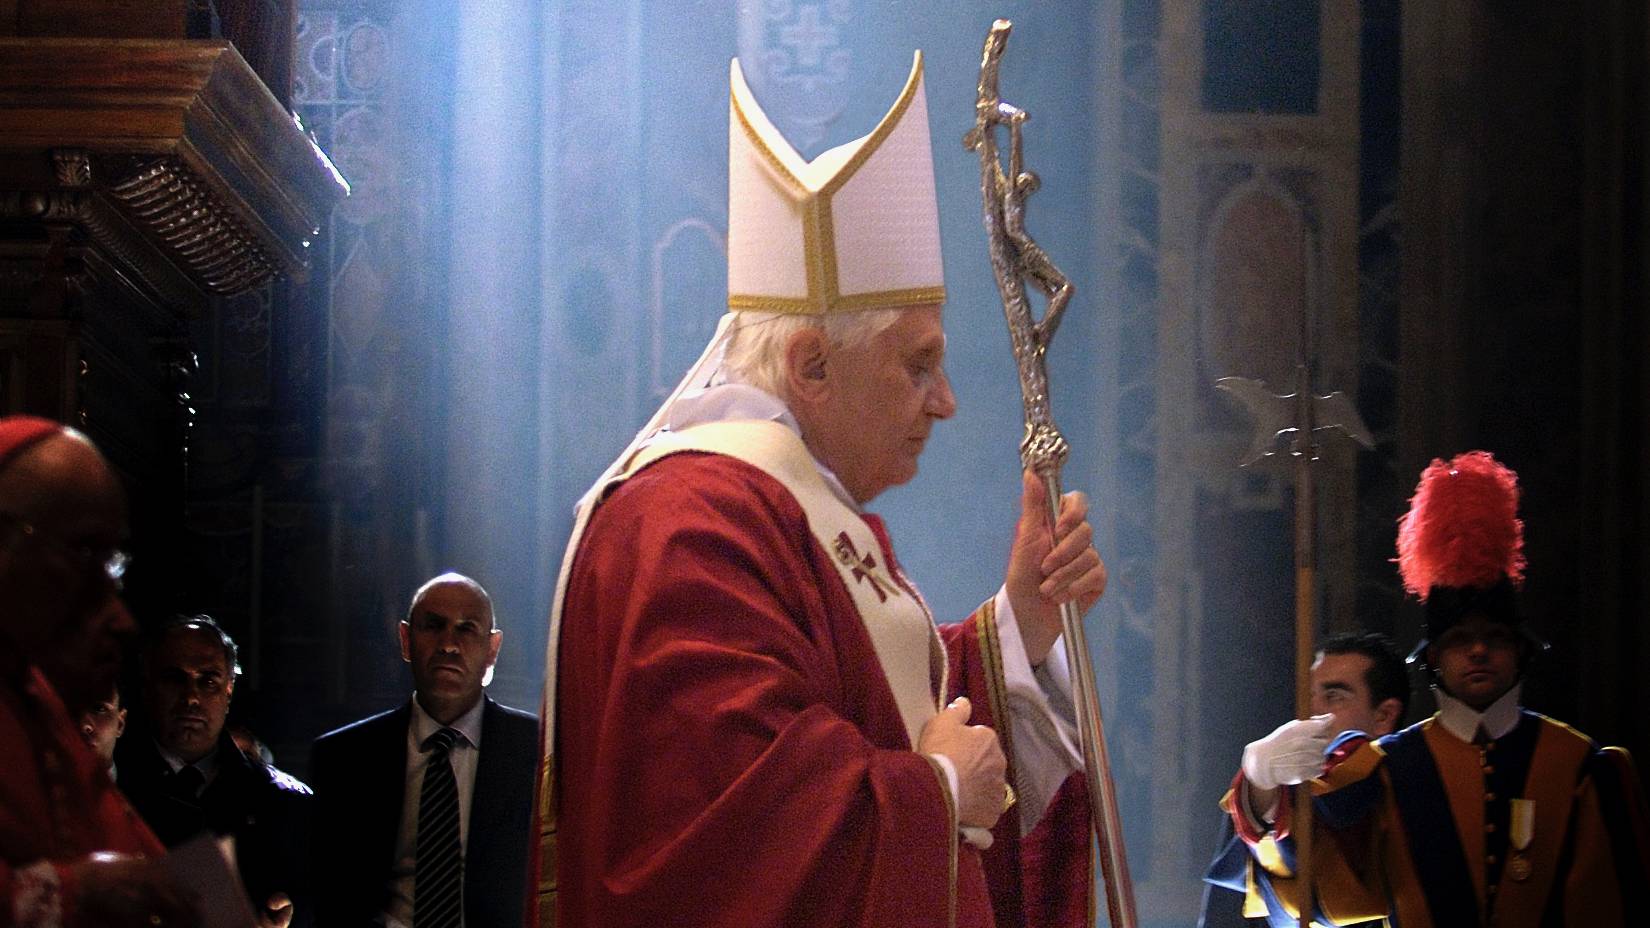 Theology in Public: Reflections on the Social Teaching of Benedict XVI